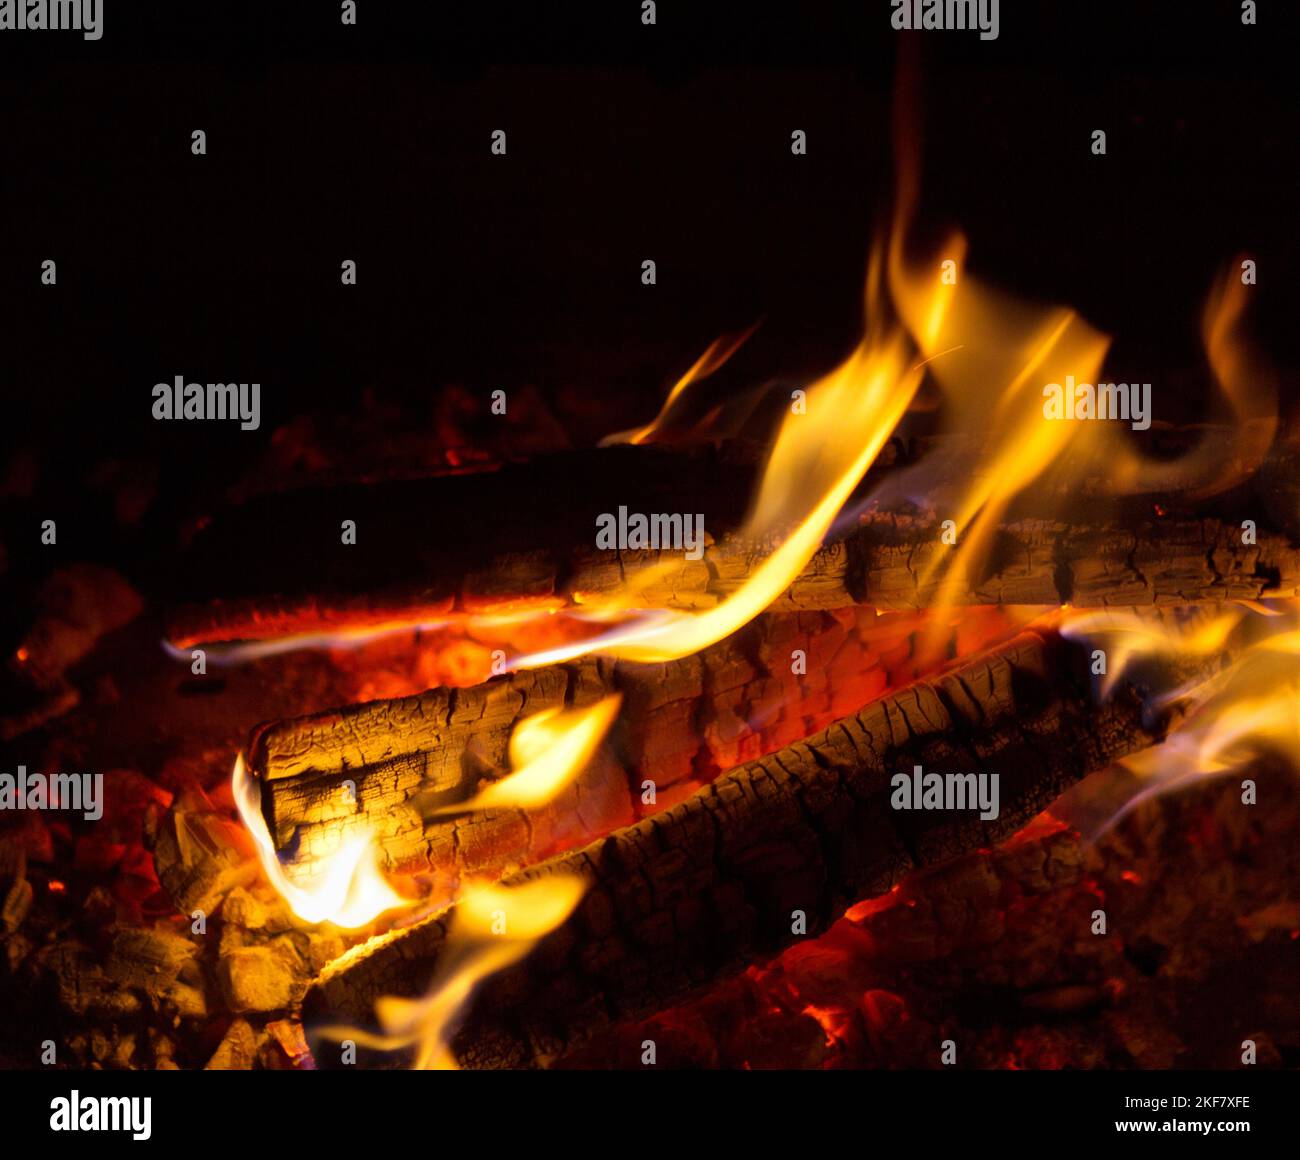 Wood burning close up. Embers charred in a flame of fire. Stock Photo